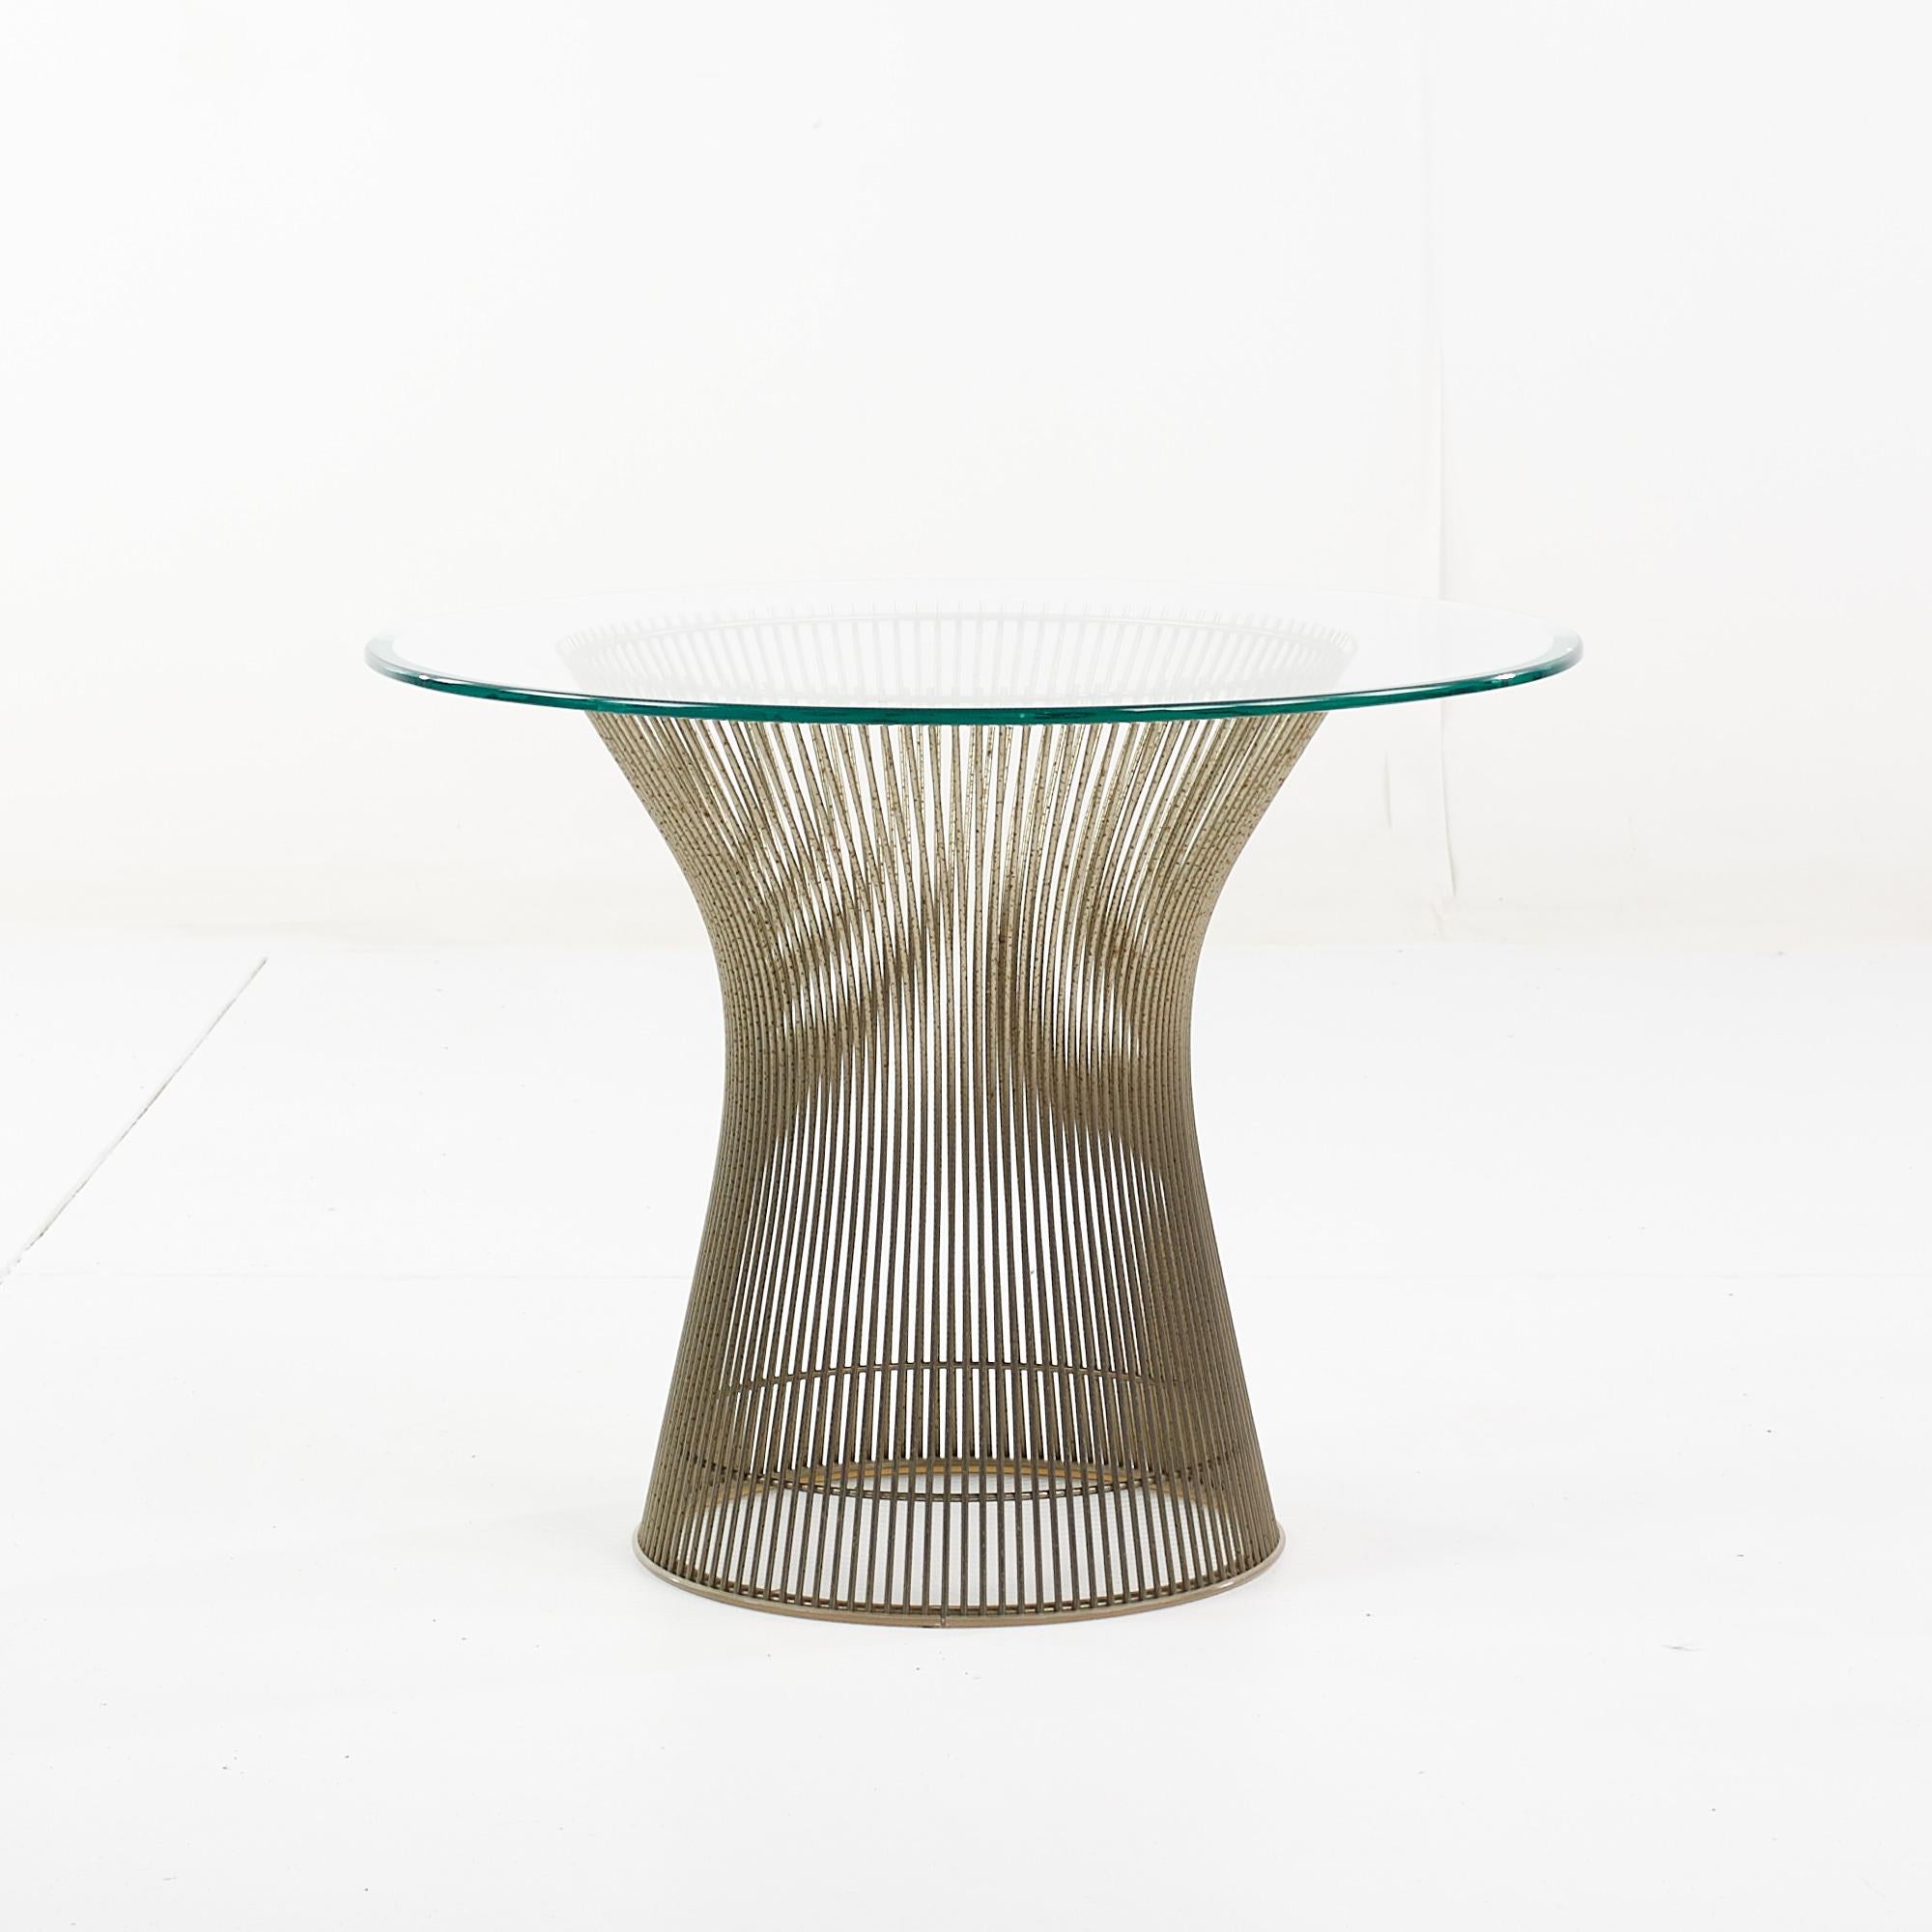 Warren Platner for Knoll Mid Century End Table

This table measures: 16 wide x 16 deep x 18.25 inches high, with a glass top of 24 wide x 24 inches deep

All pieces of furniture can be had in what we call restored vintage condition. That means the